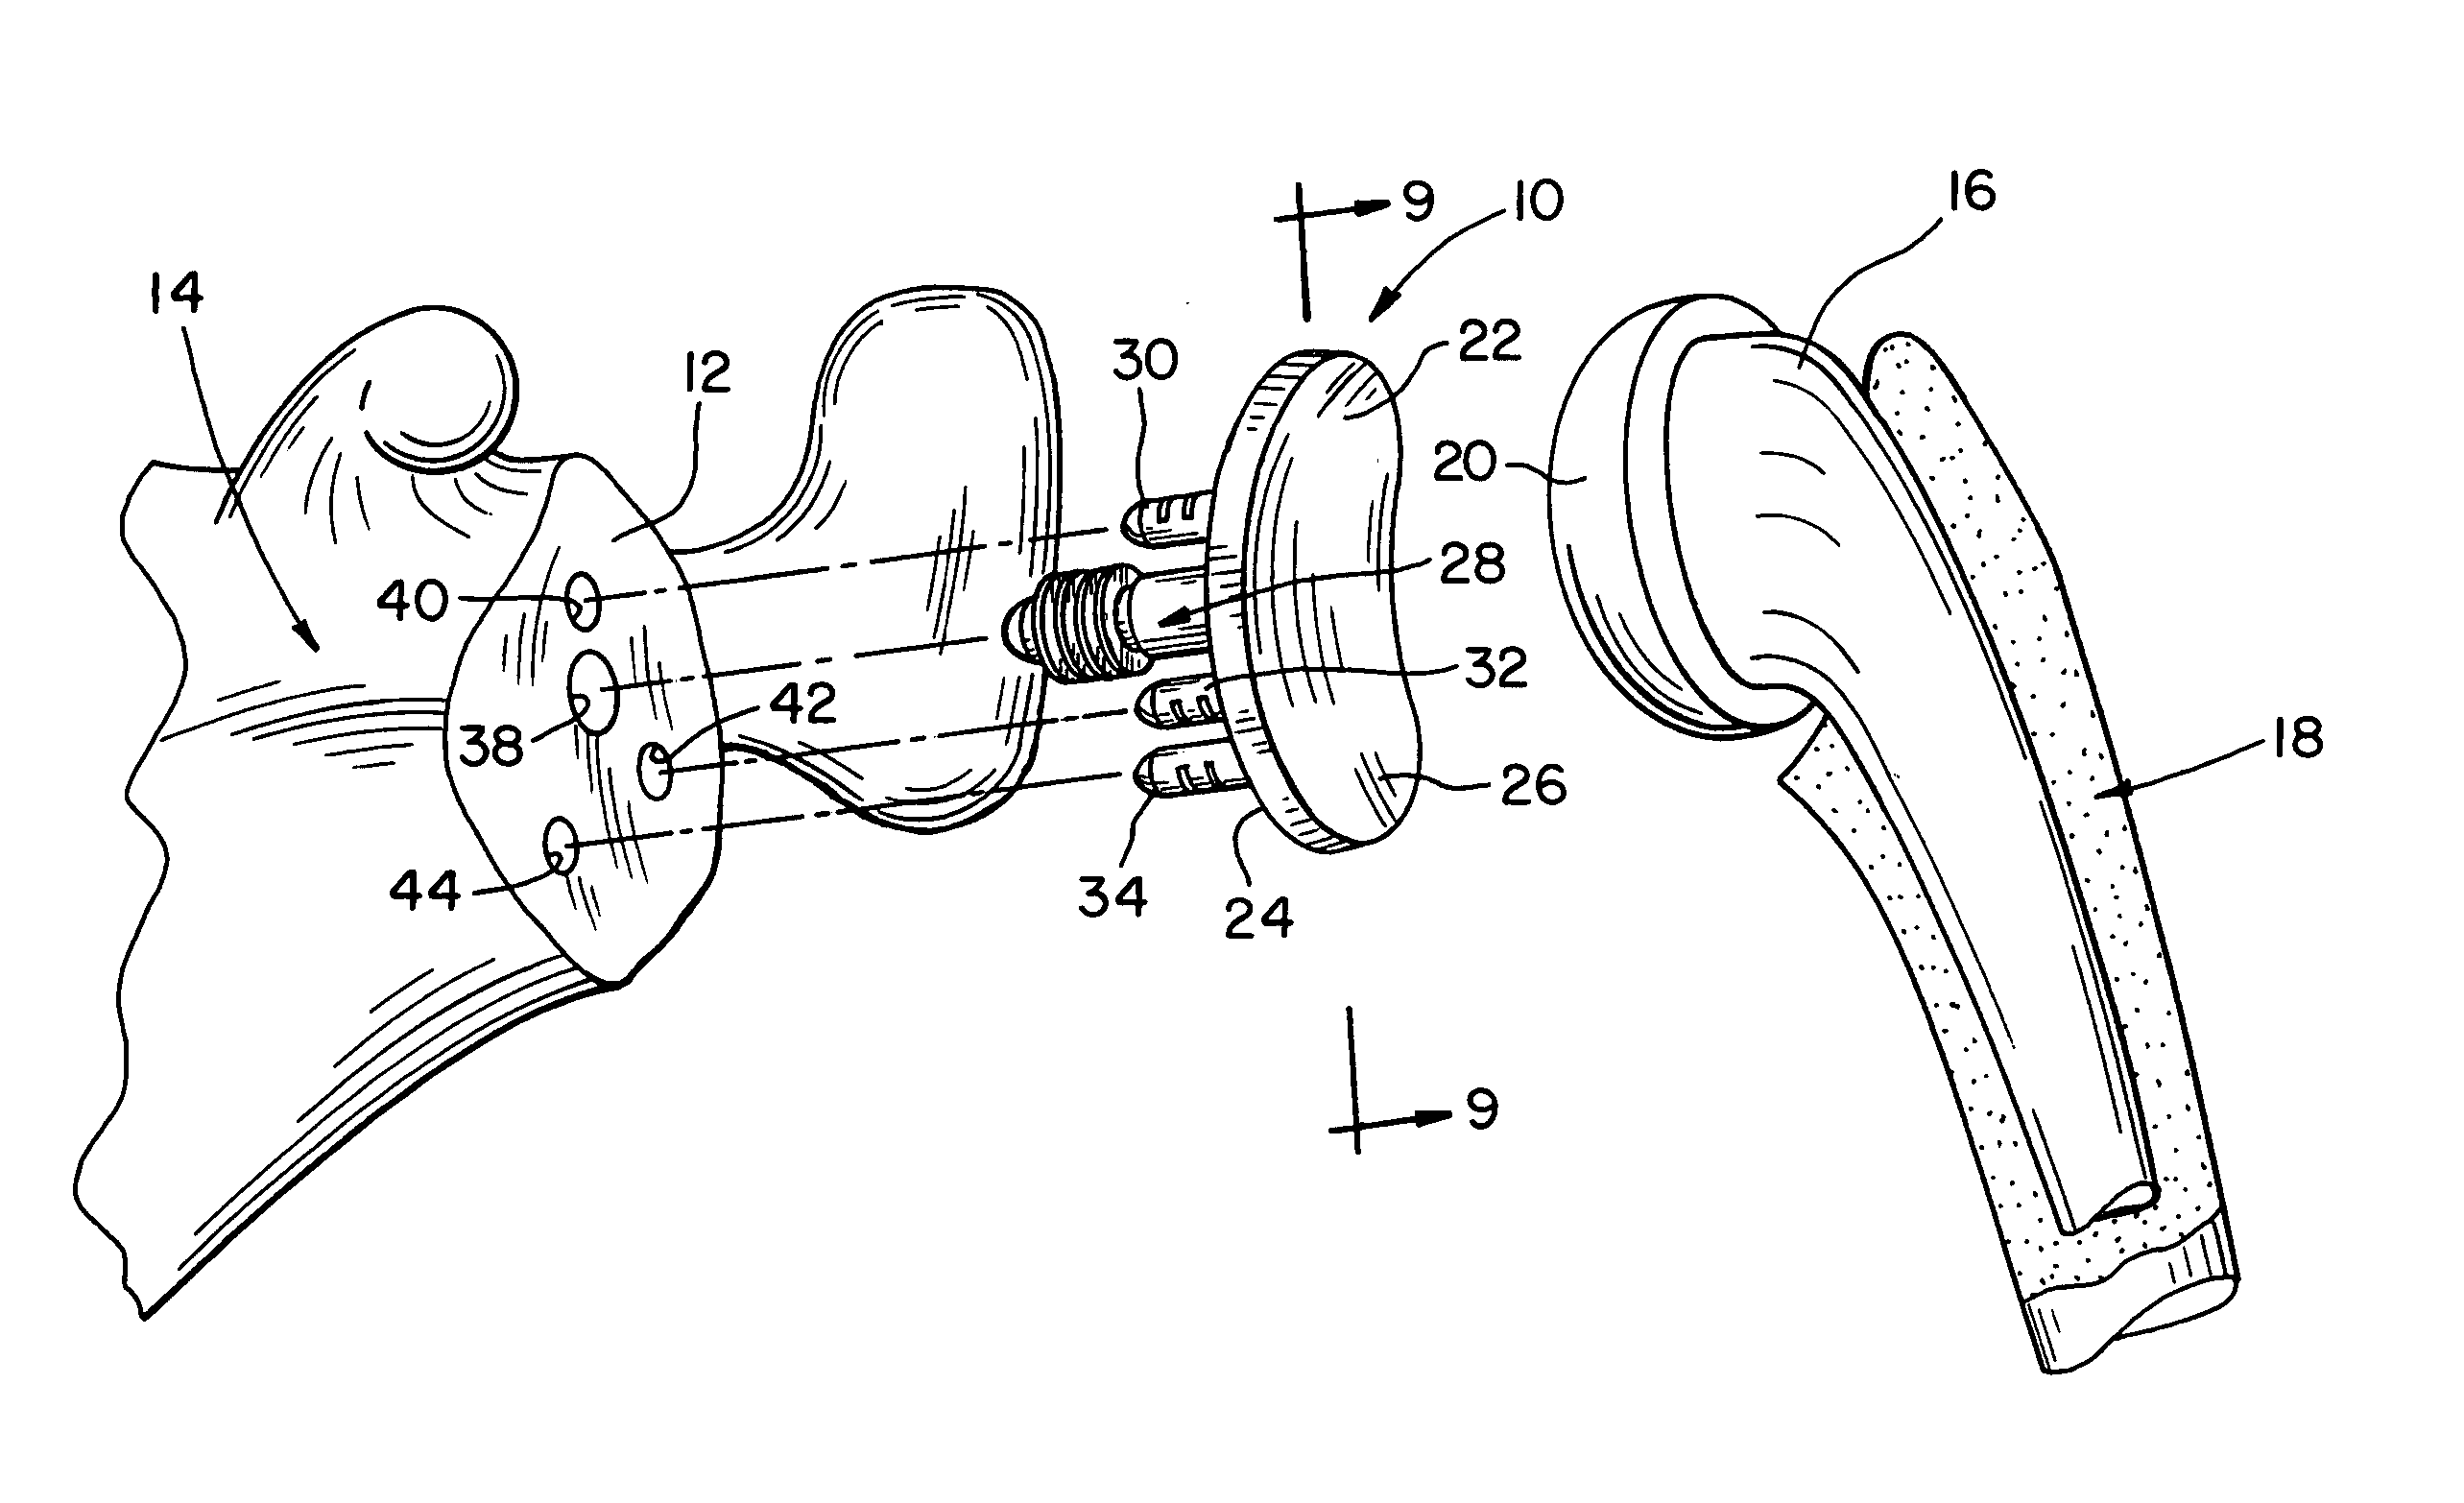 Method for securing a glenoid component to a scapula